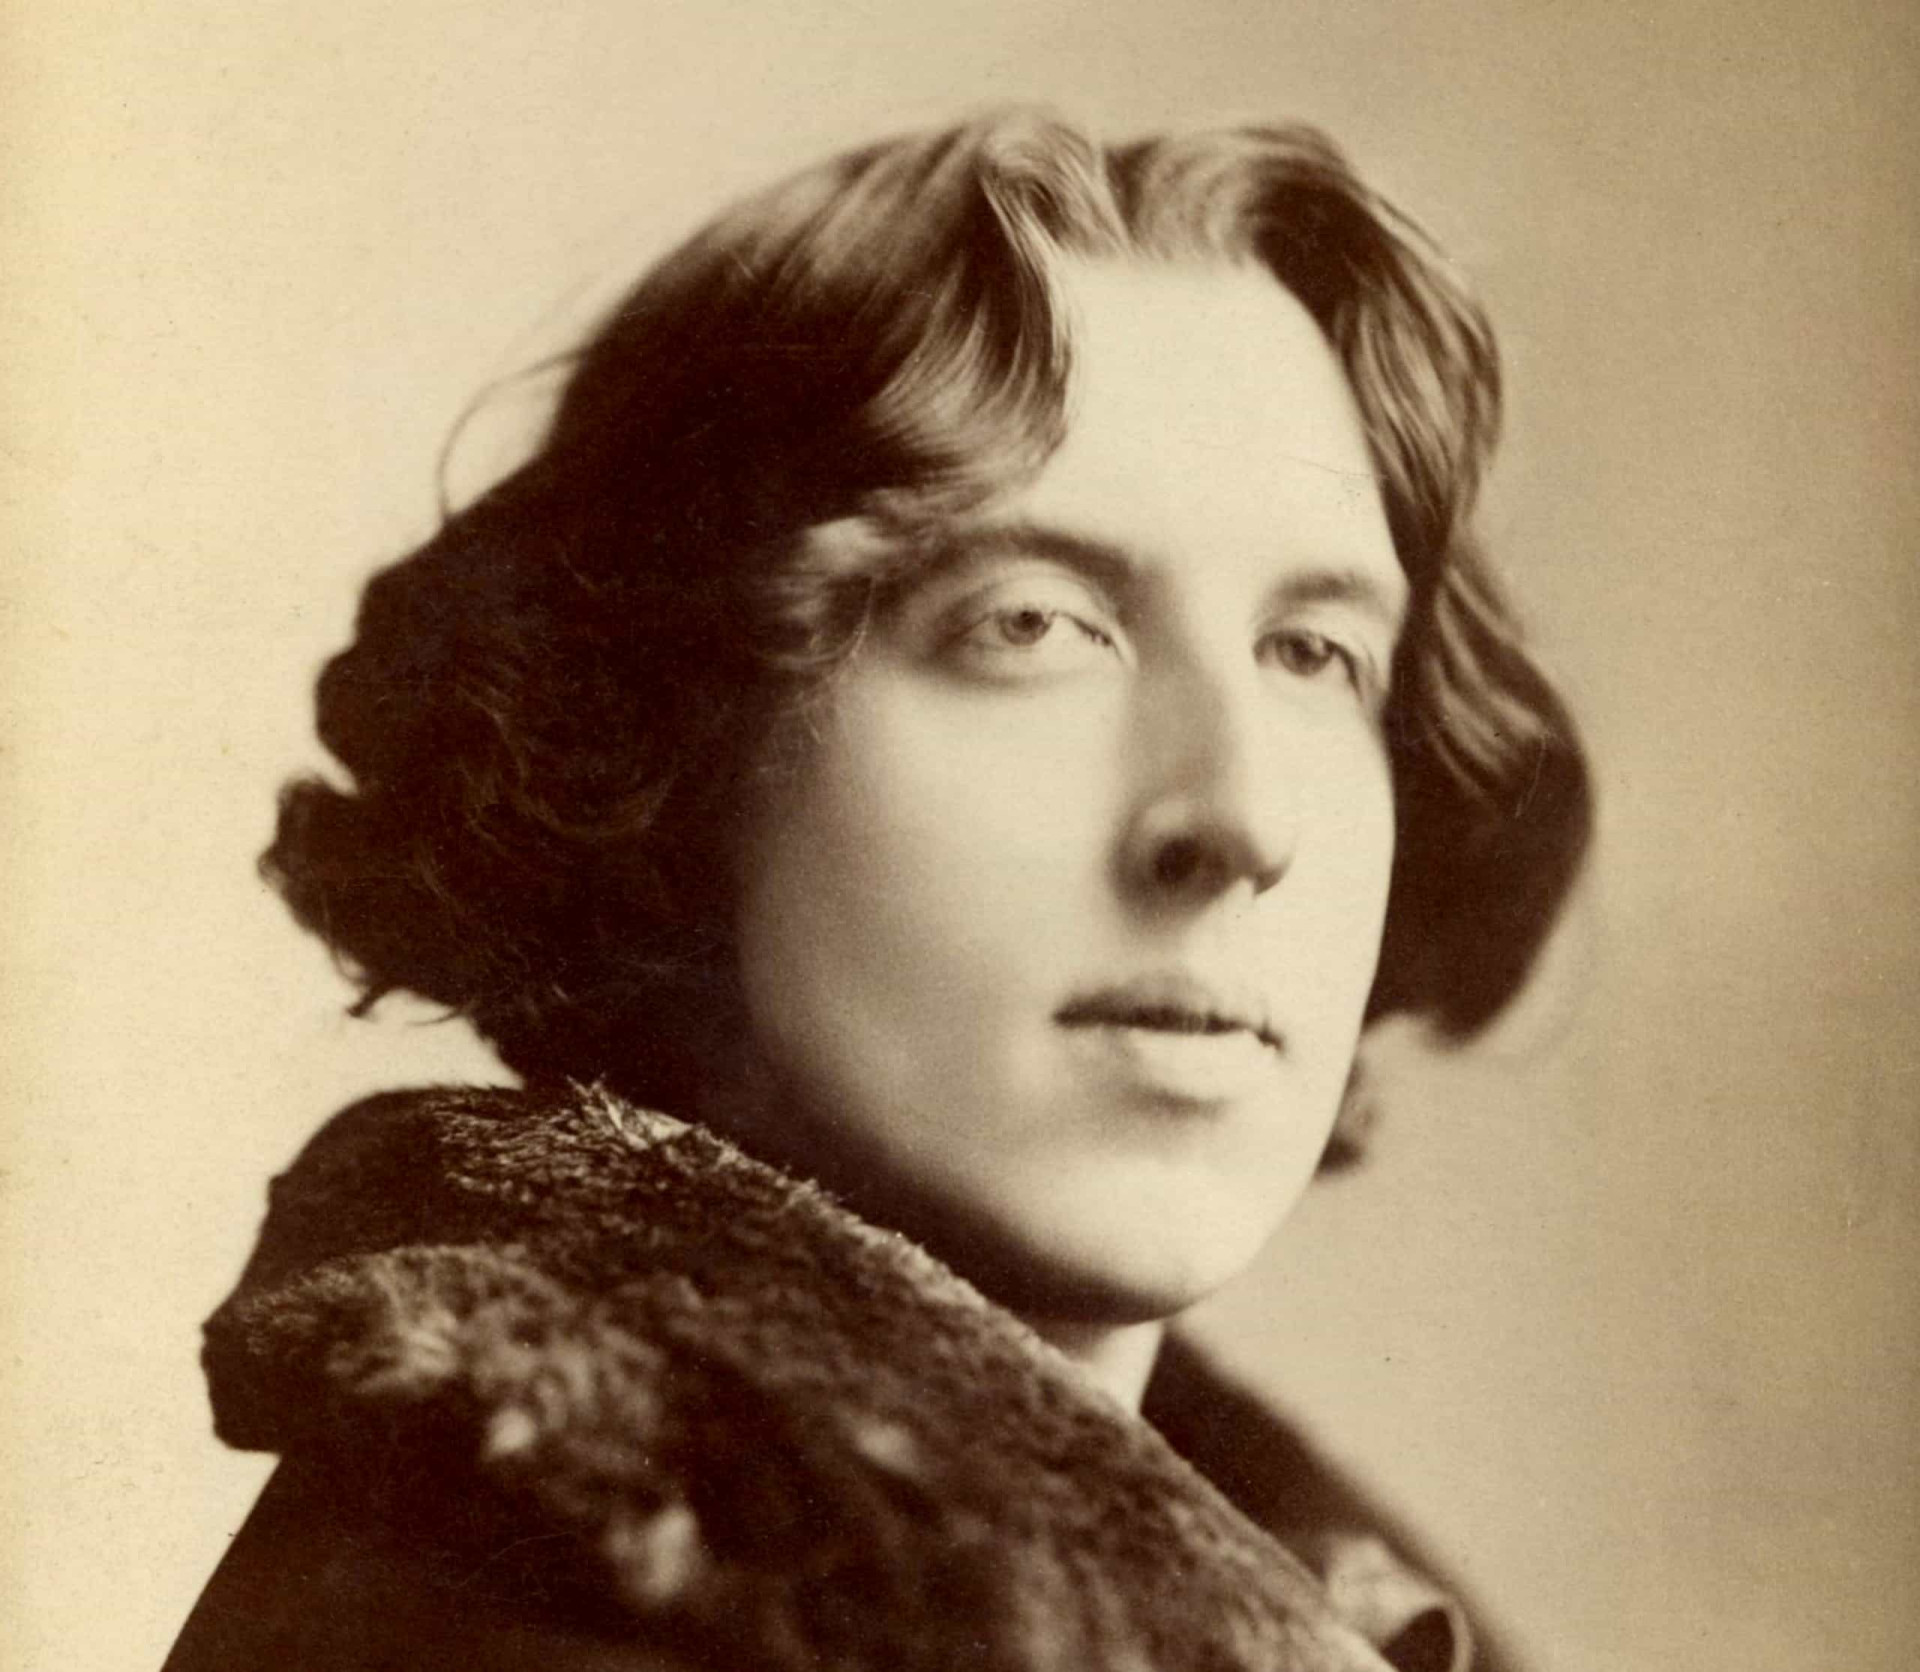 <p>Born in Dublin, <a href="https://www.starsinsider.com/travel/283631/ireland-forever-the-emerald-isle" rel="noopener">Ireland</a>, on October 16, 1854, Oscar Wilde was one of the most celebrated poets and dramatists of his era. Known for his acclaimed works, including 'The Picture of Dorian Gray' and 'The Importance of Being Earnest,' as well as his flamboyant lifestyle, eccentric  dress sense, and extraordinary wit, Wilde lived a short but full and controversial life and died aged only 46. His plays have been the subject numerous stage, film, and television adaptations, and have influenced a generation of actors, writers, and directors.</p><p><a href="https://www.msn.com/en-us/community/channel/vid-7xx8mnucu55yw63we9va2gwr7uihbxwc68fxqp25x6tg4ftibpra?cvid=94631541bc0f4f89bfd59158d696ad7e">Follow us and access great exclusive content every day</a></p>